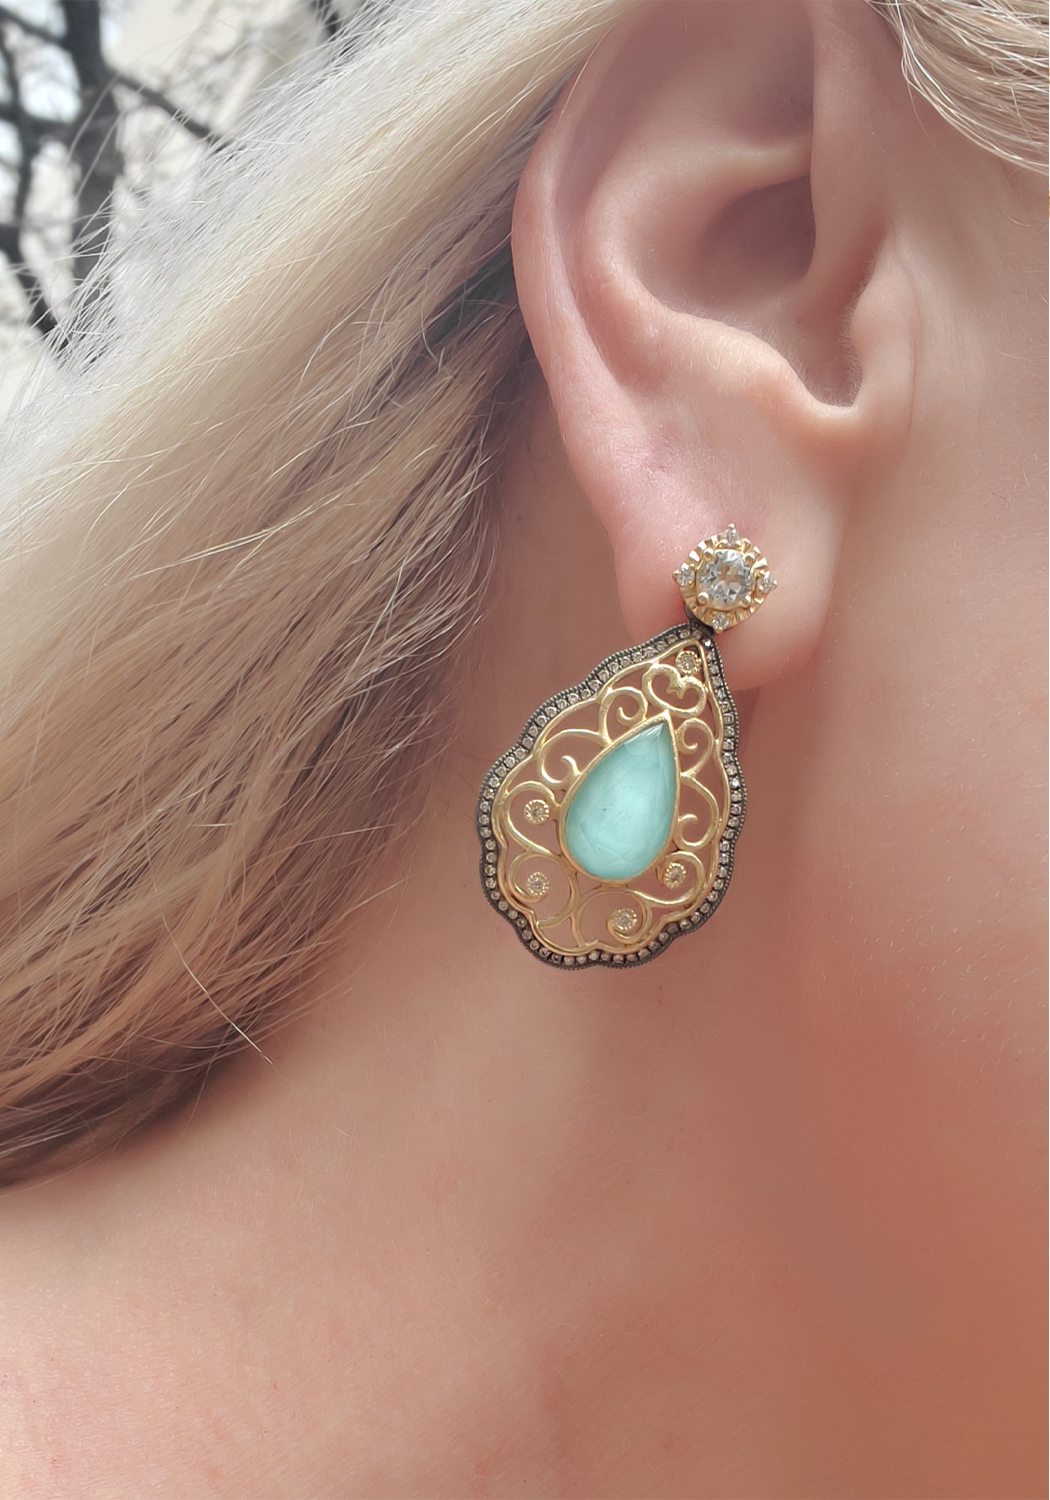 Cynthia Ann Filigree Turquoise Teardrop Earring Jackets Shown With a Diamond Stud (Sold Separtely)